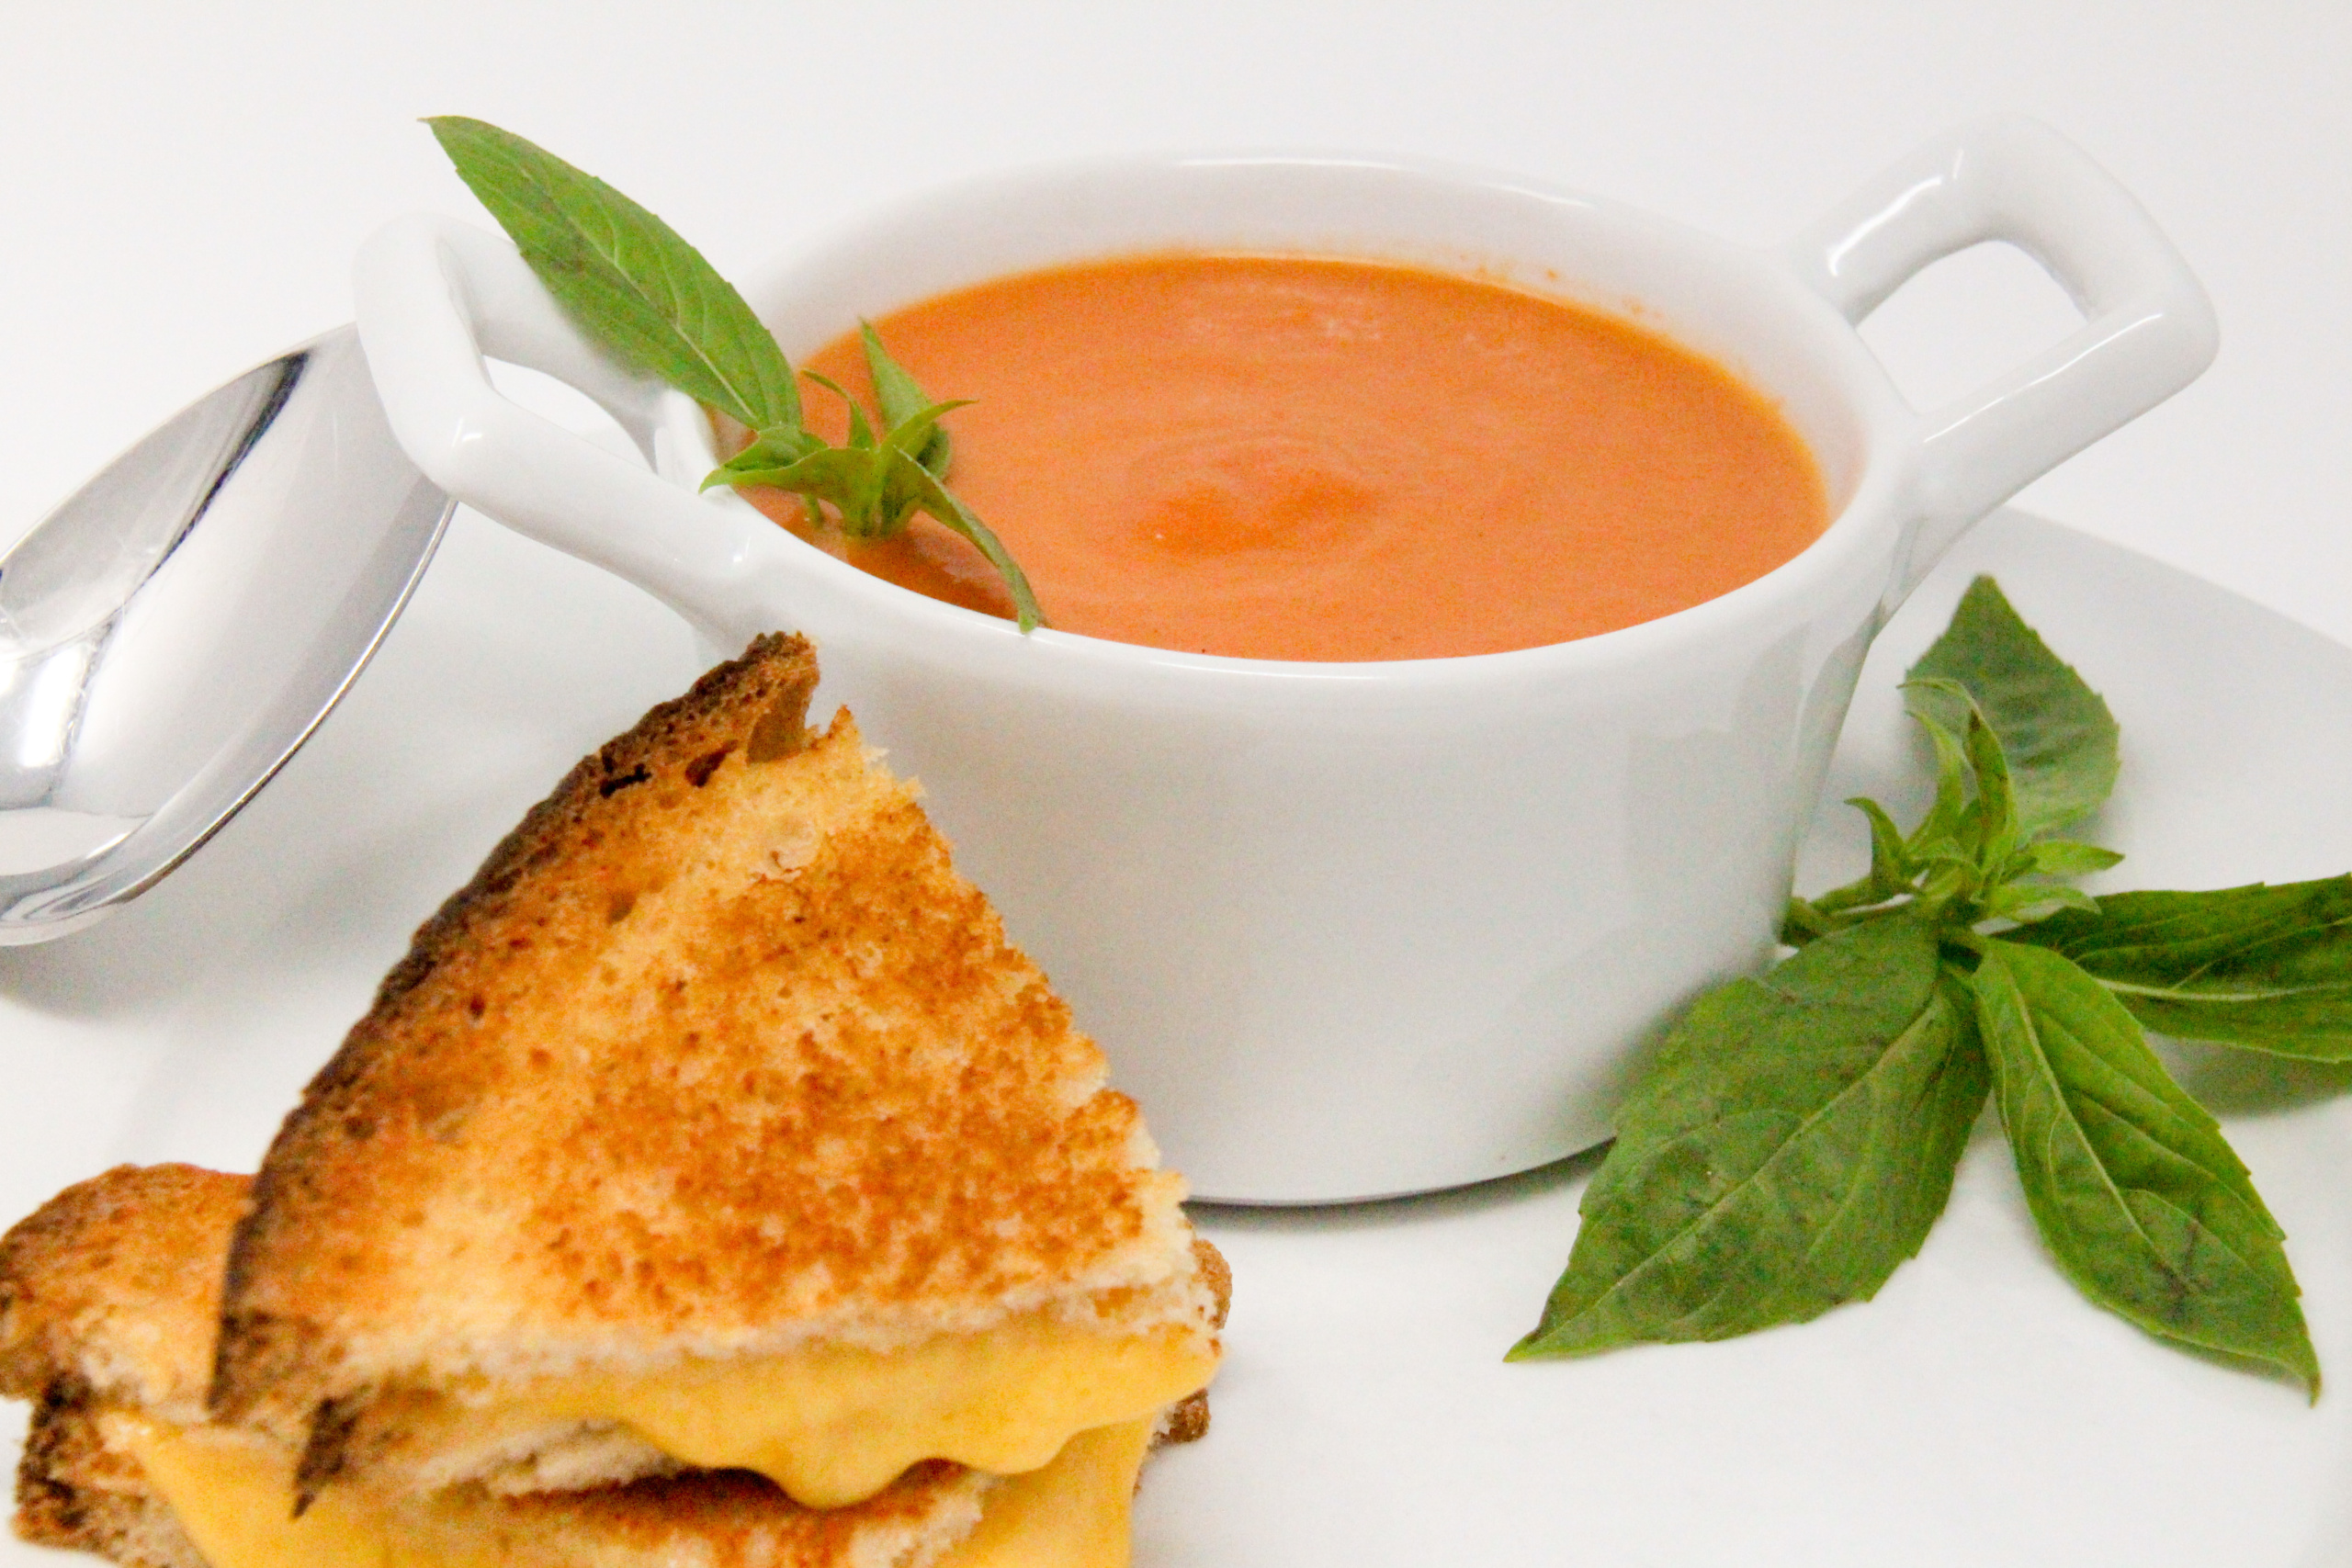 Grant's Tomato Soup uses canned San Marzano tomatoes, plus the addition of other fresh ingredients and sherry which elevates the flavor to yum. With a bit a cream, the added richness complements the tang of cheese in a grilled cheese sandwich. Recipe shared with permission granted by Linda Reilly, author of CHEDDER LATE THAN DEAD. 